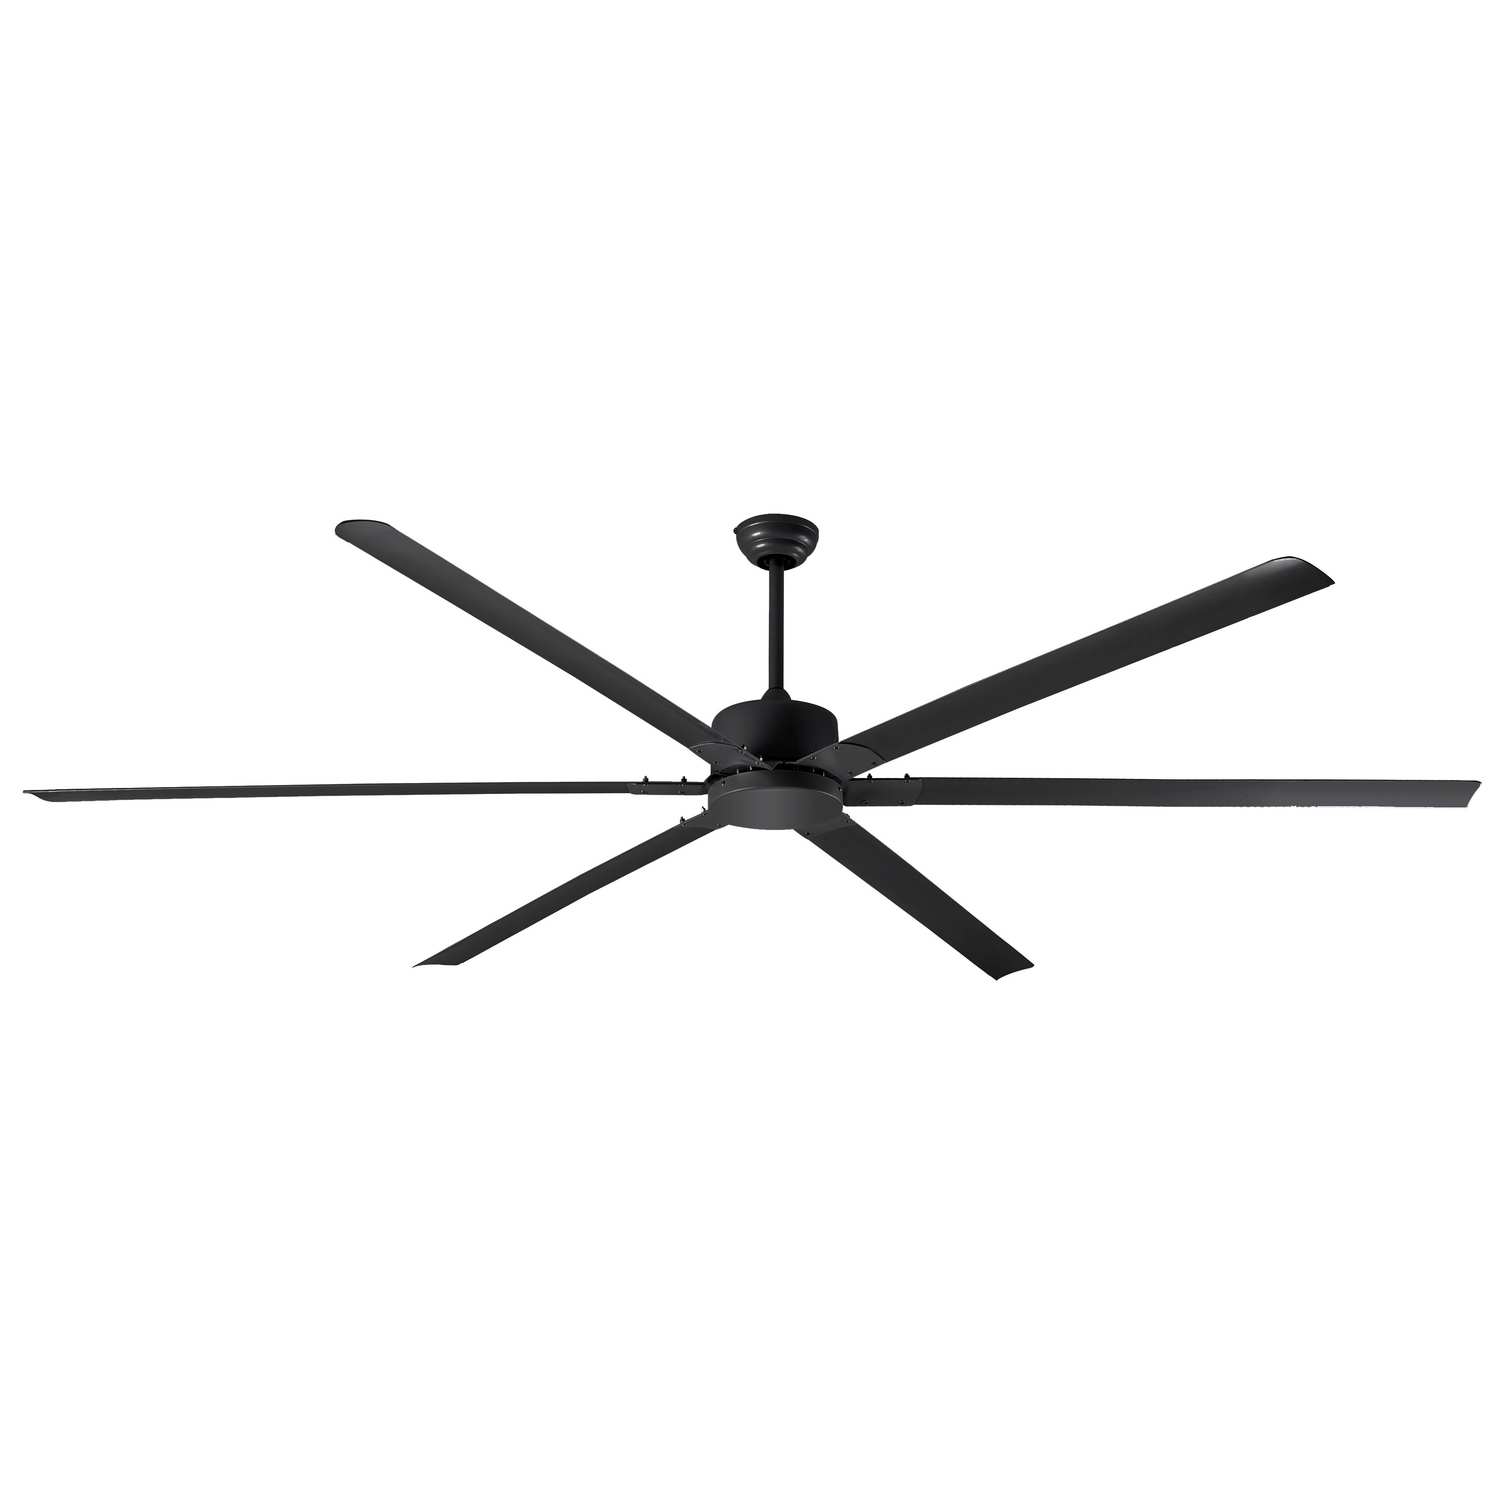 Ceiling Fans Category